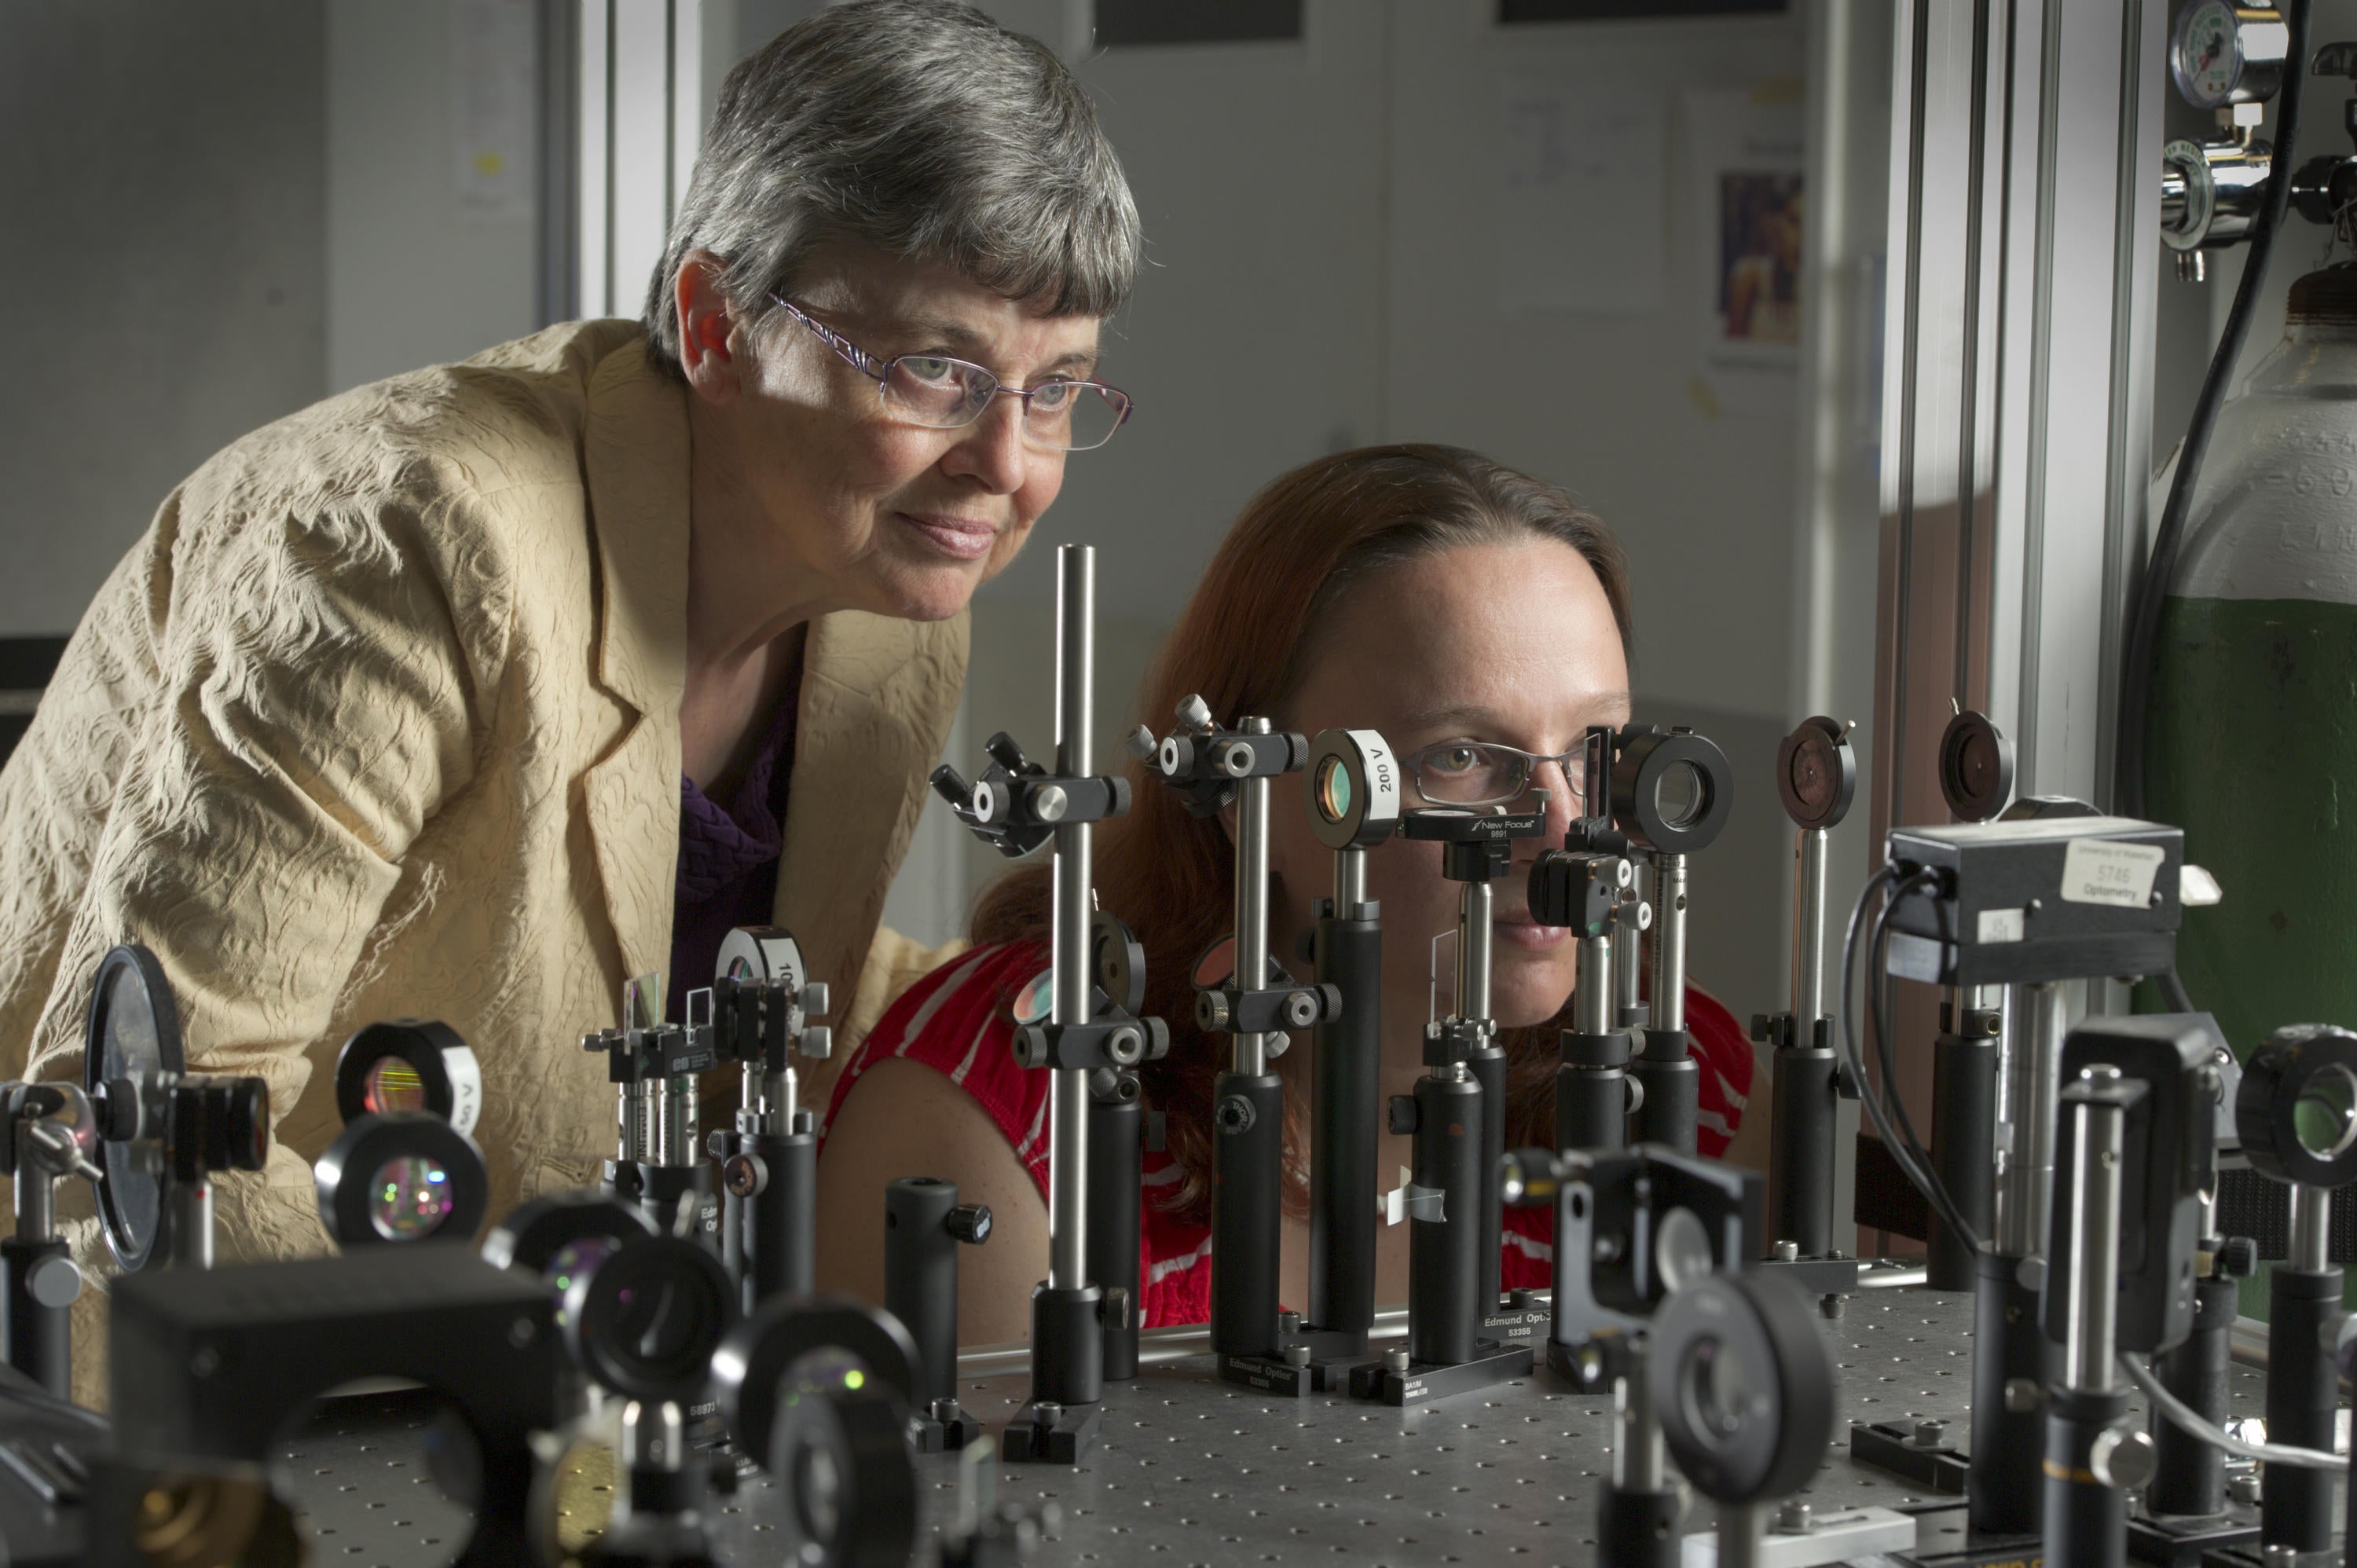 Melanie Campbell and her optical image instrument